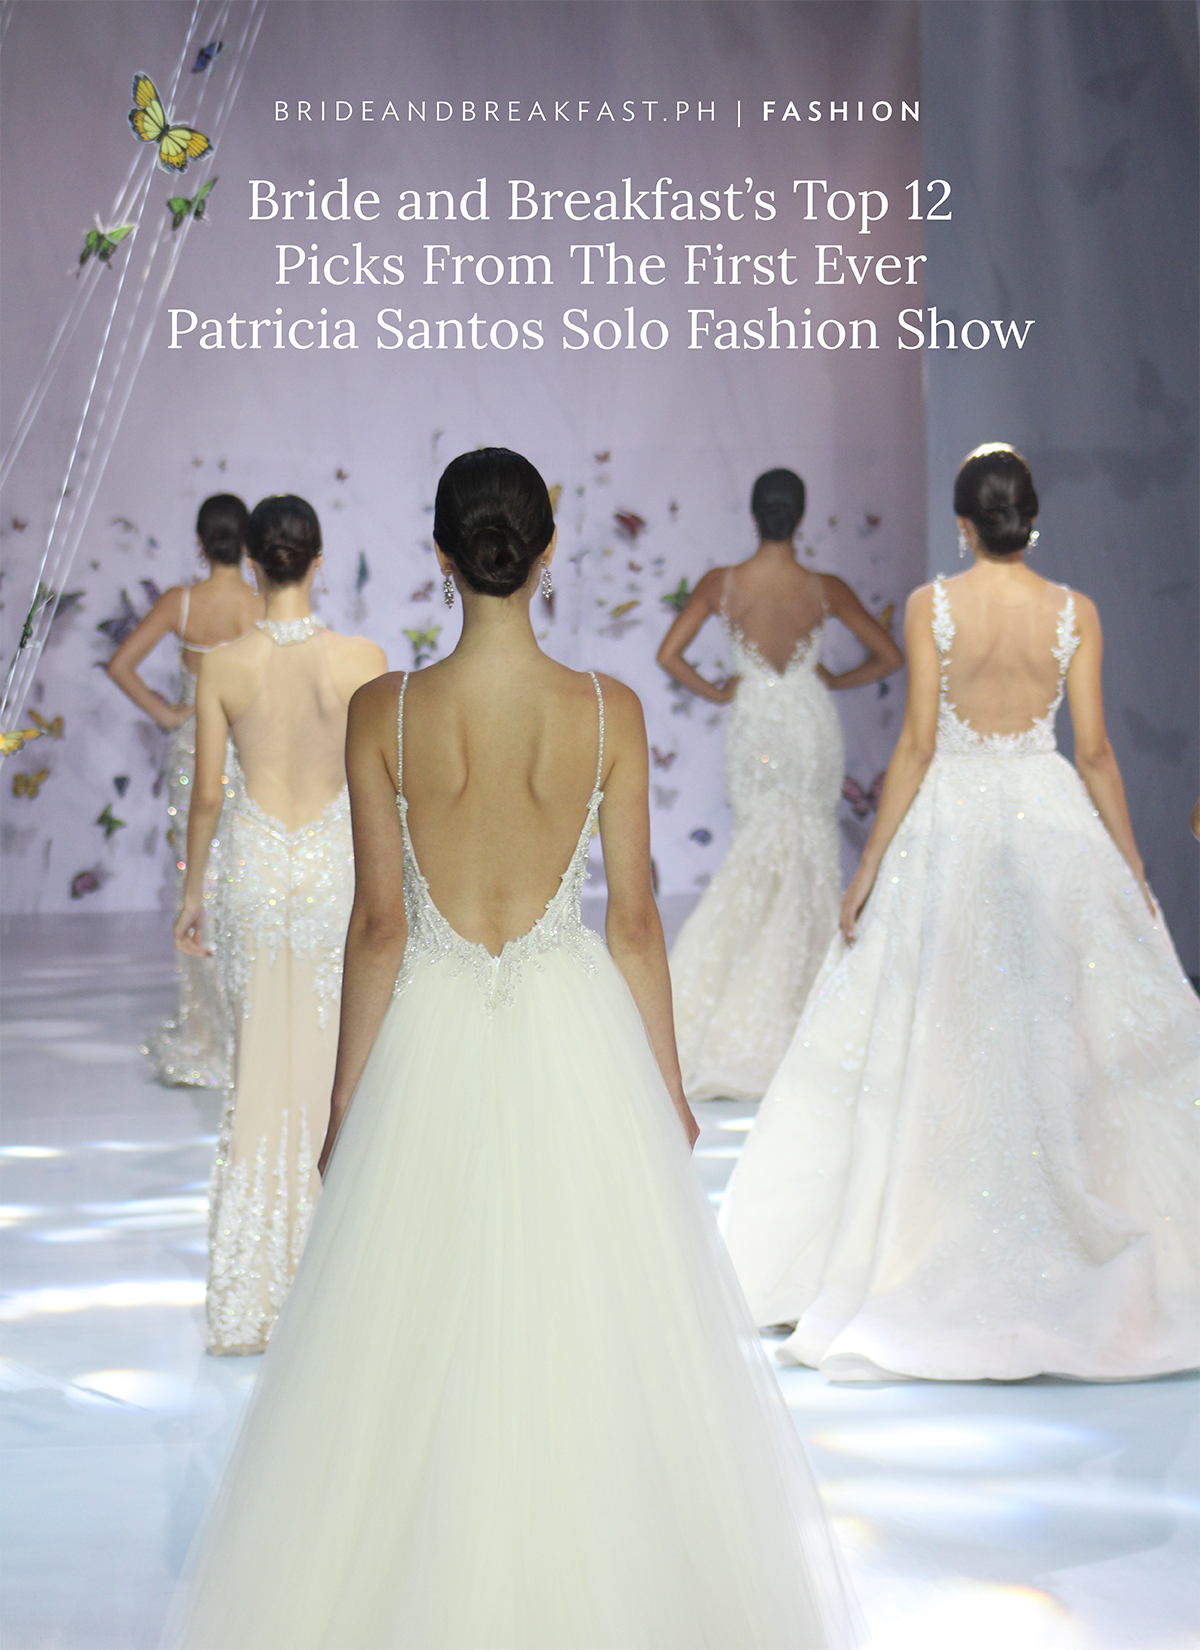 Bride and Breakfast's Top 12 Picks from the First Ever Patricia Santos Solo Fashion Show